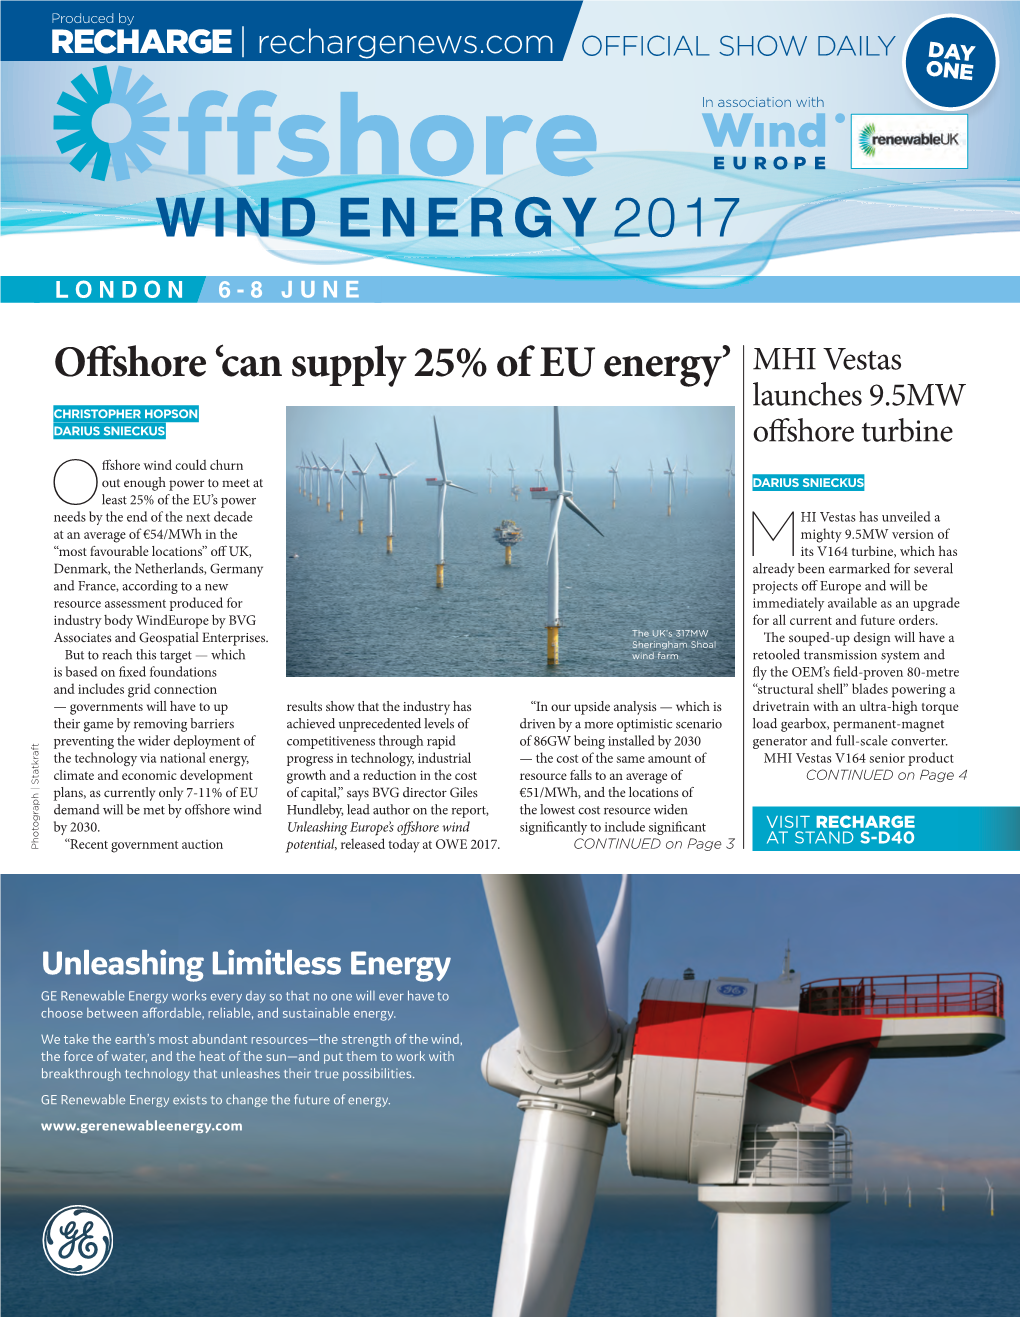 Offshore 'Can Supply 25% of EU Energy'